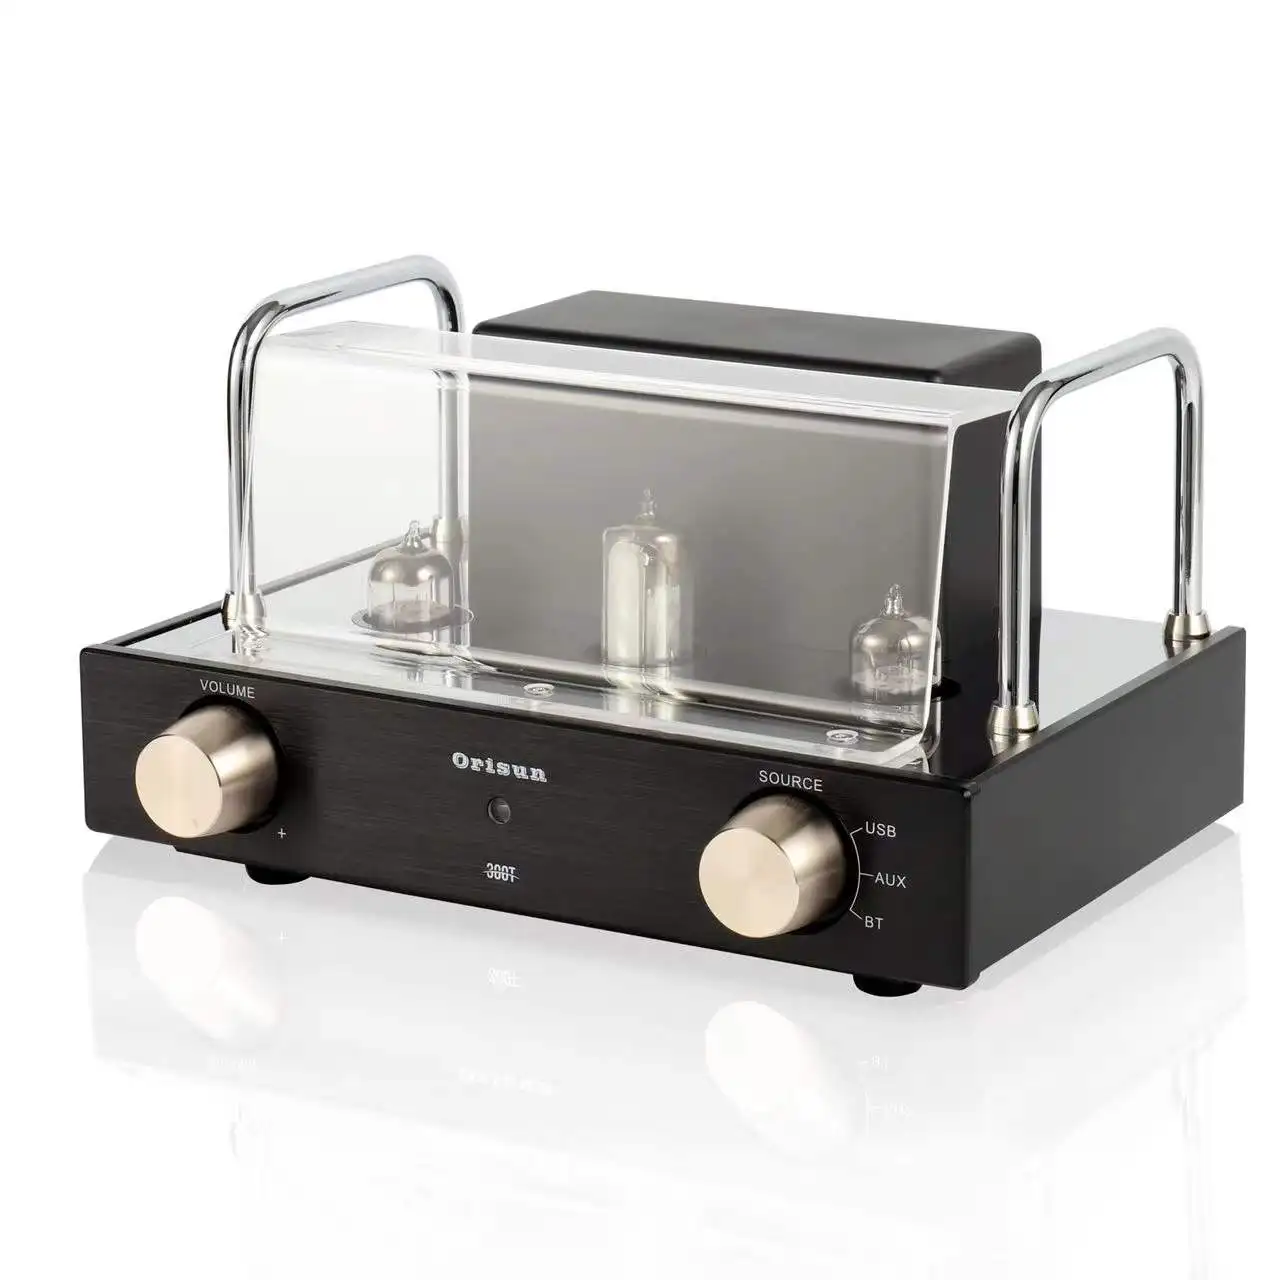 

Tube Single-Ended Amp HIFI Class A Point to Point Blue tooth V5 Black Lamp Amplifier Home high surround sound